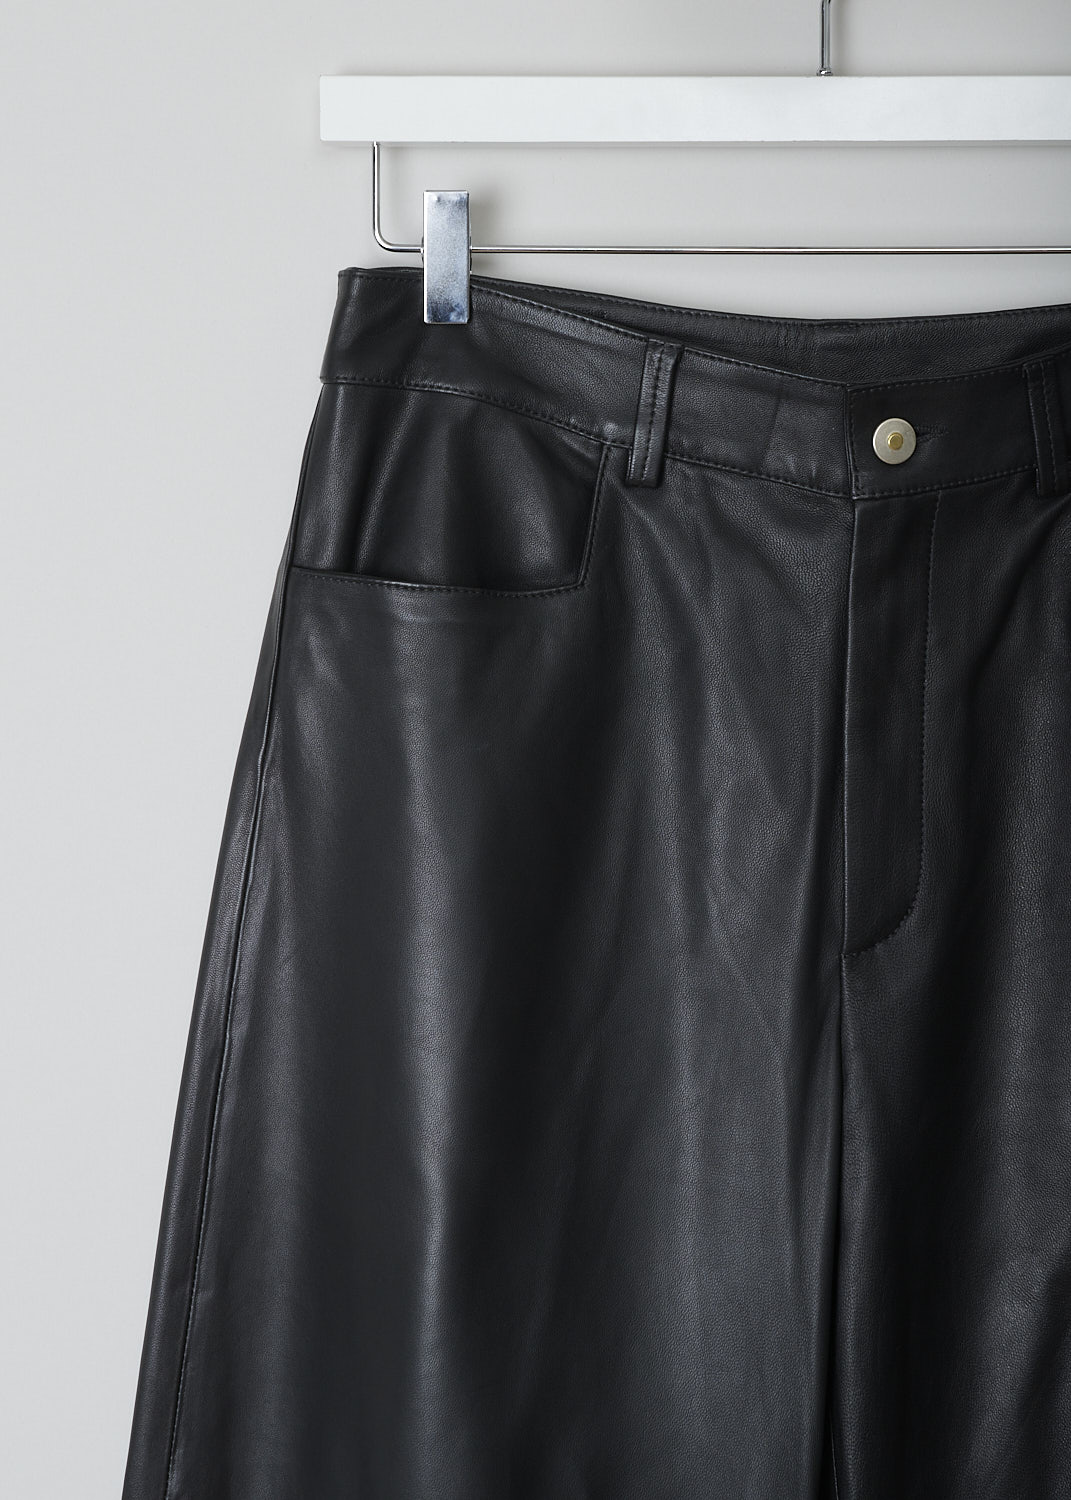 WANDLER, CHAMOMILE BLACK PANTS, 22306_060301_3200_CHAMOMILE_BLACK, Black, Detail, These black leather Chamomile pants have a waistband with belt loops and a button and zip closure. The pants have a high-waisted fit. The balloon legs are cropped at the ankle. These pants have slanted pockets in the front and patch pockets in the back. 

